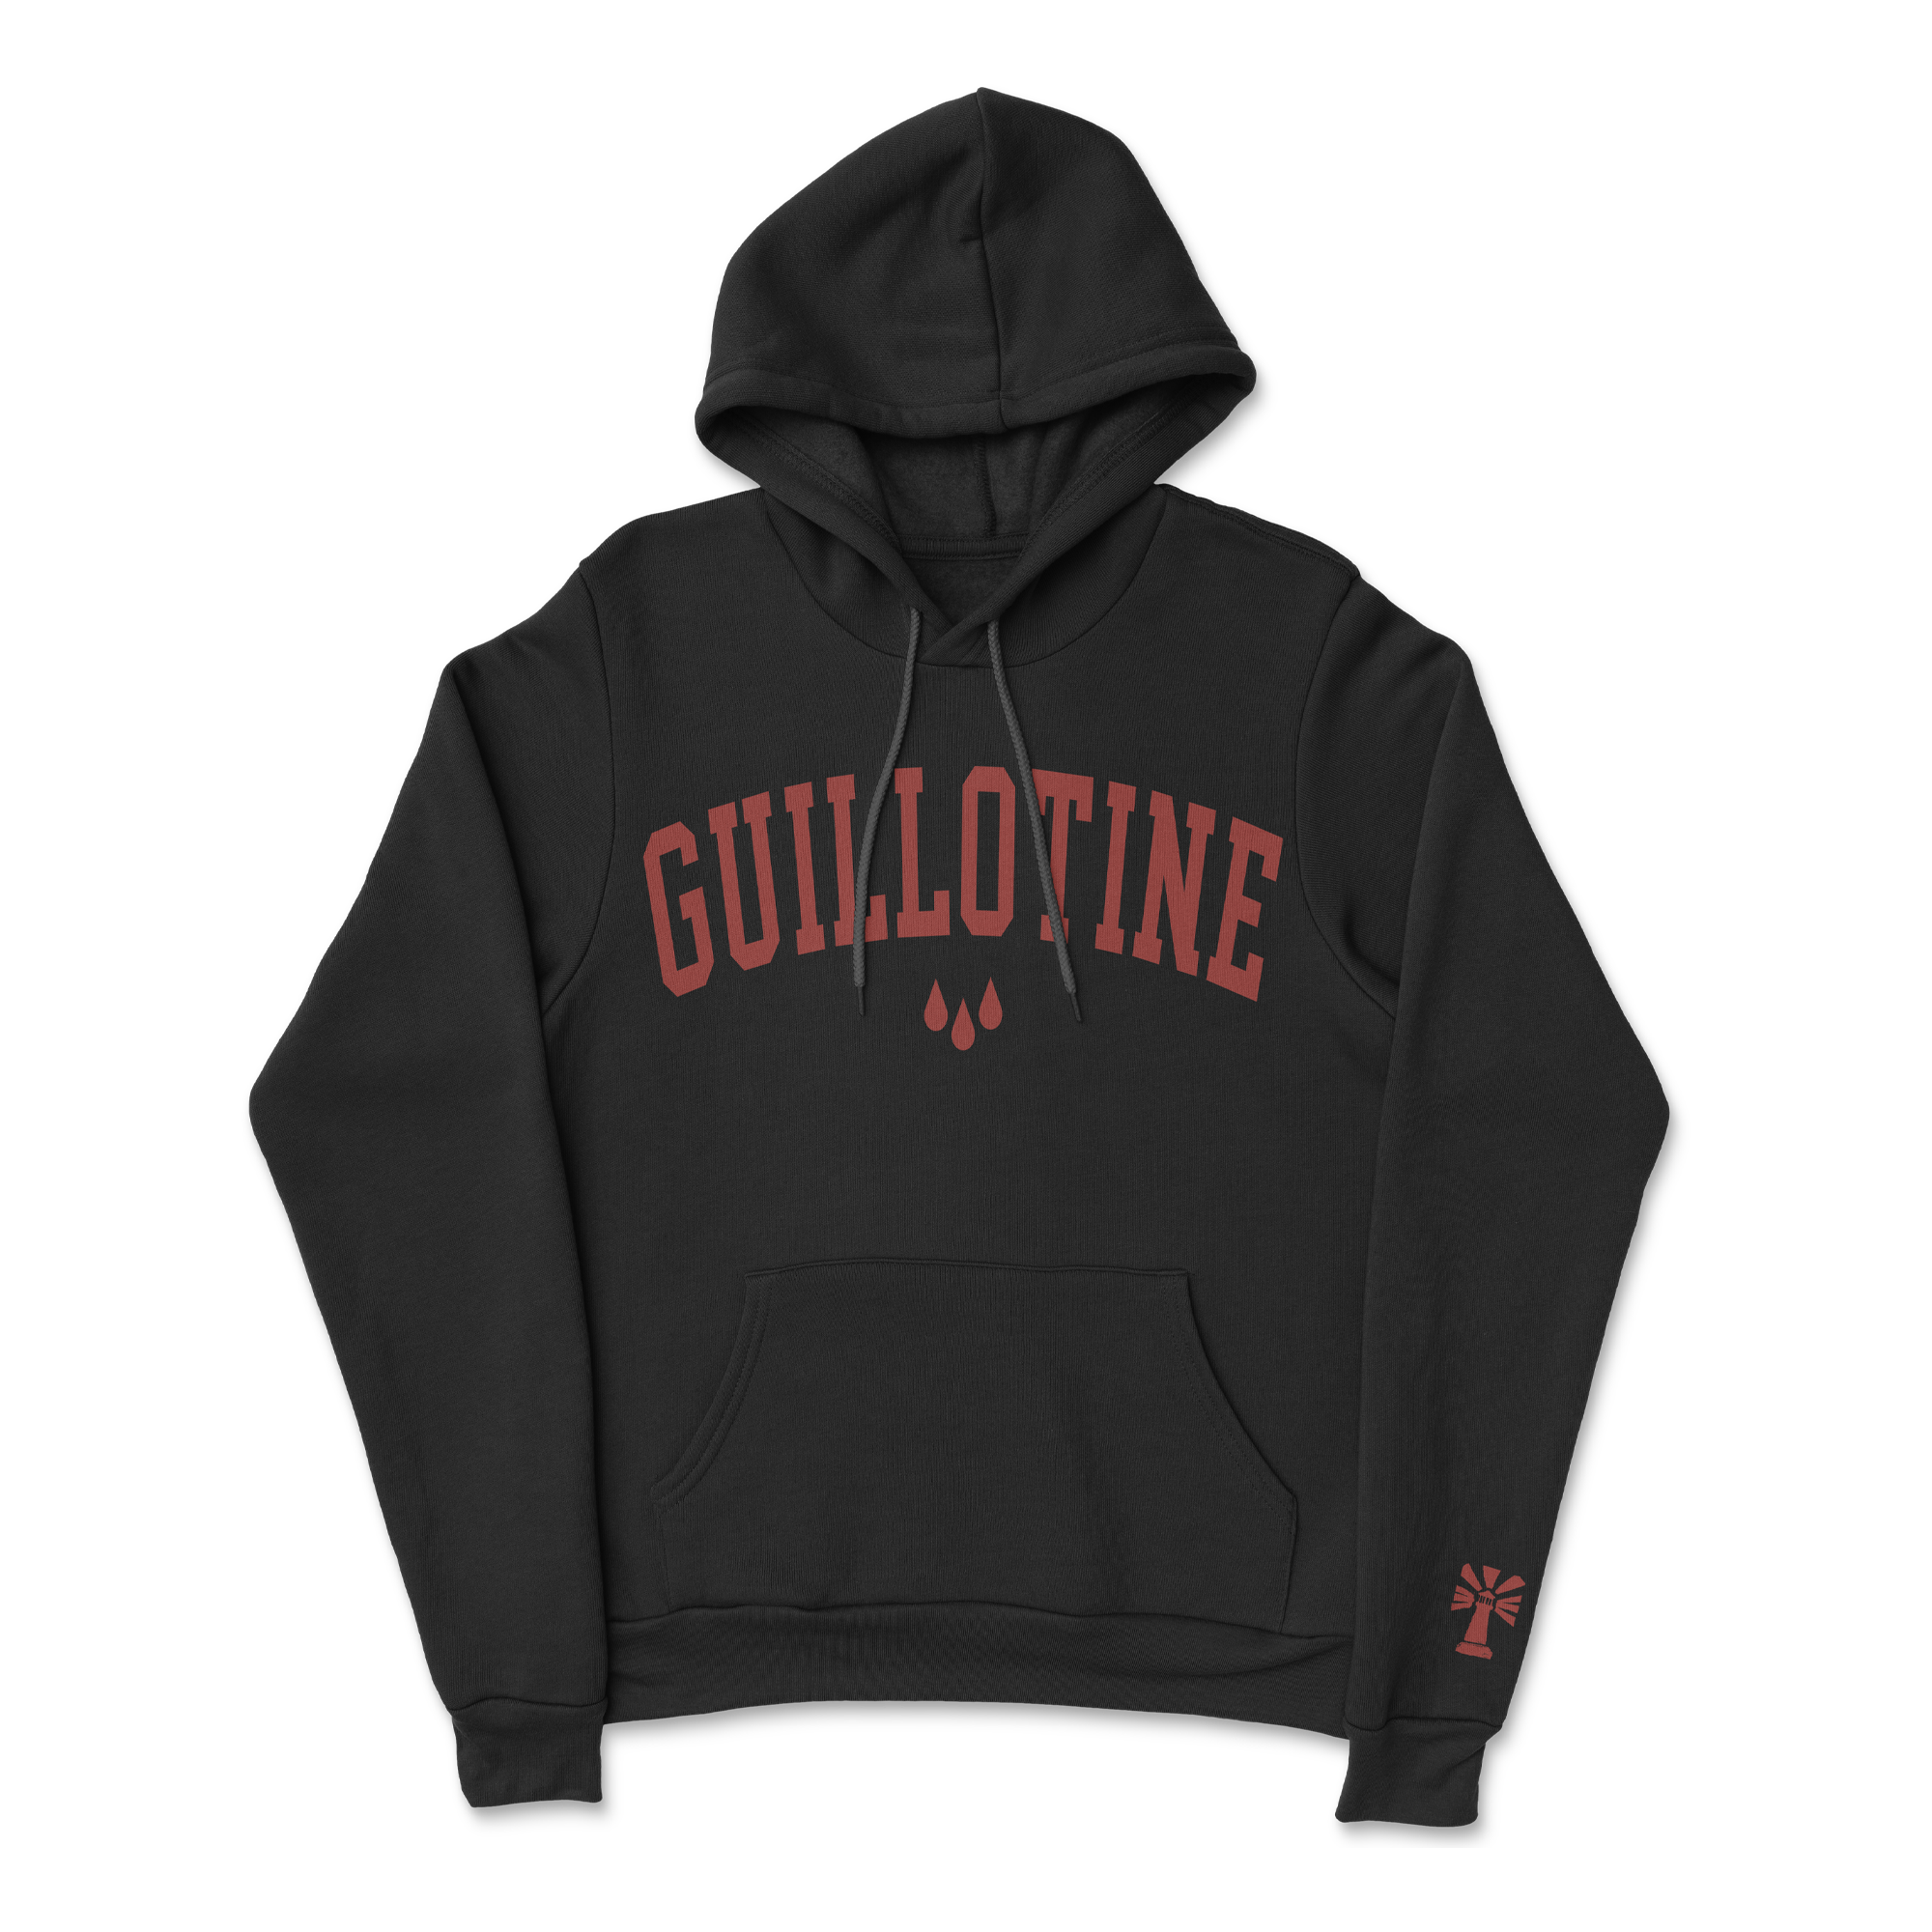 Stray From The Path - Black Guillotine Hoodie w/Embroidered Sleeve